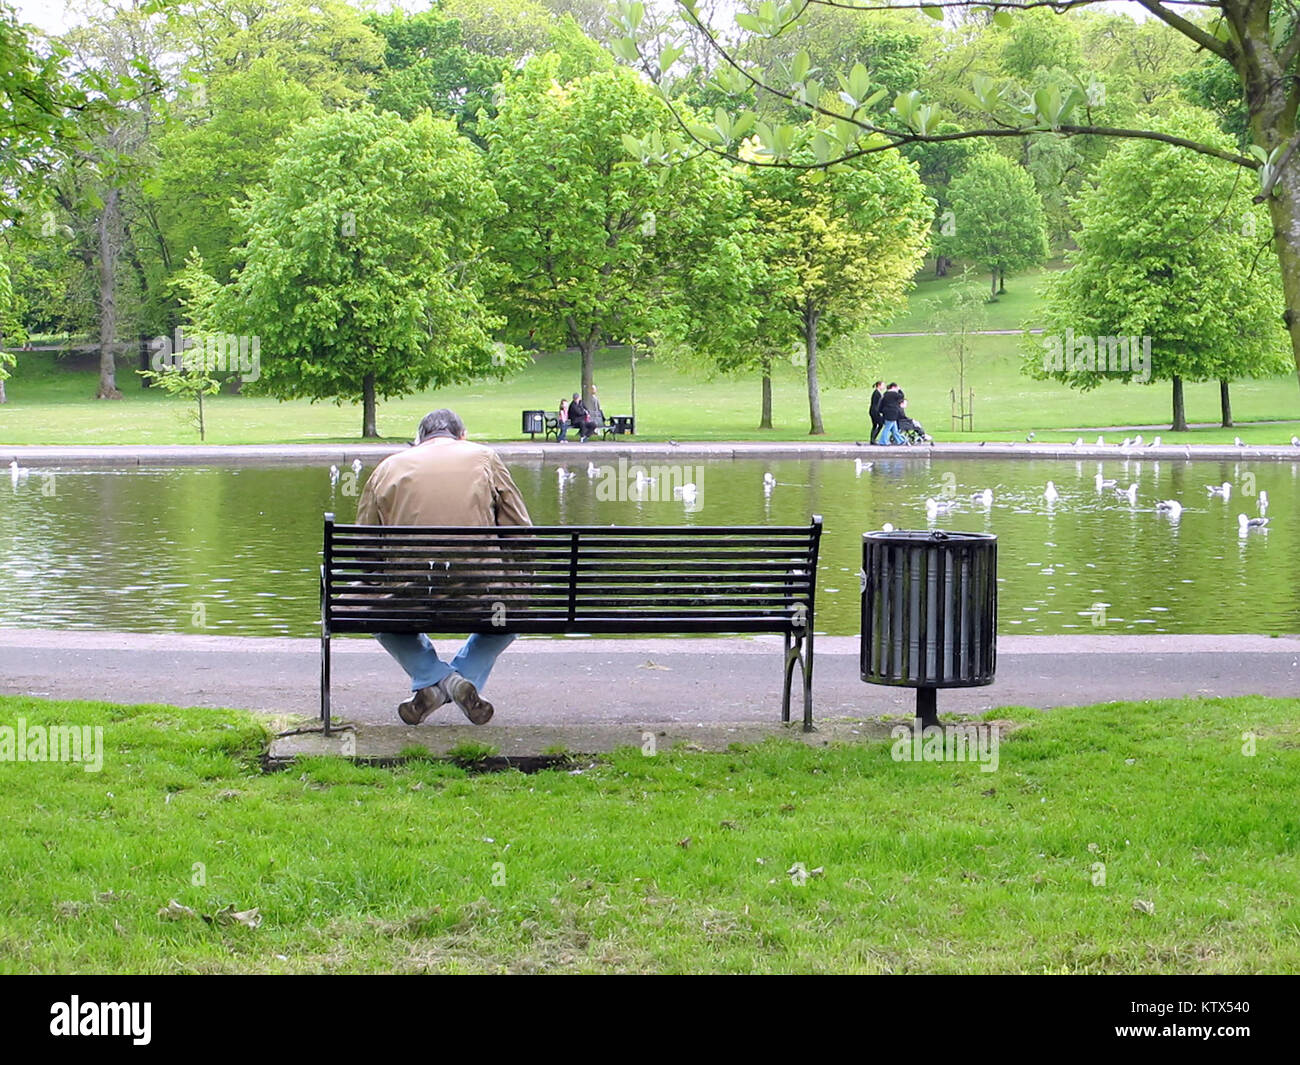 Queen's Park Glasgow,UK single man unemployed sitting on park bench next to pond green trees sunny afternoon depressed lonely hairmless Stock Photo